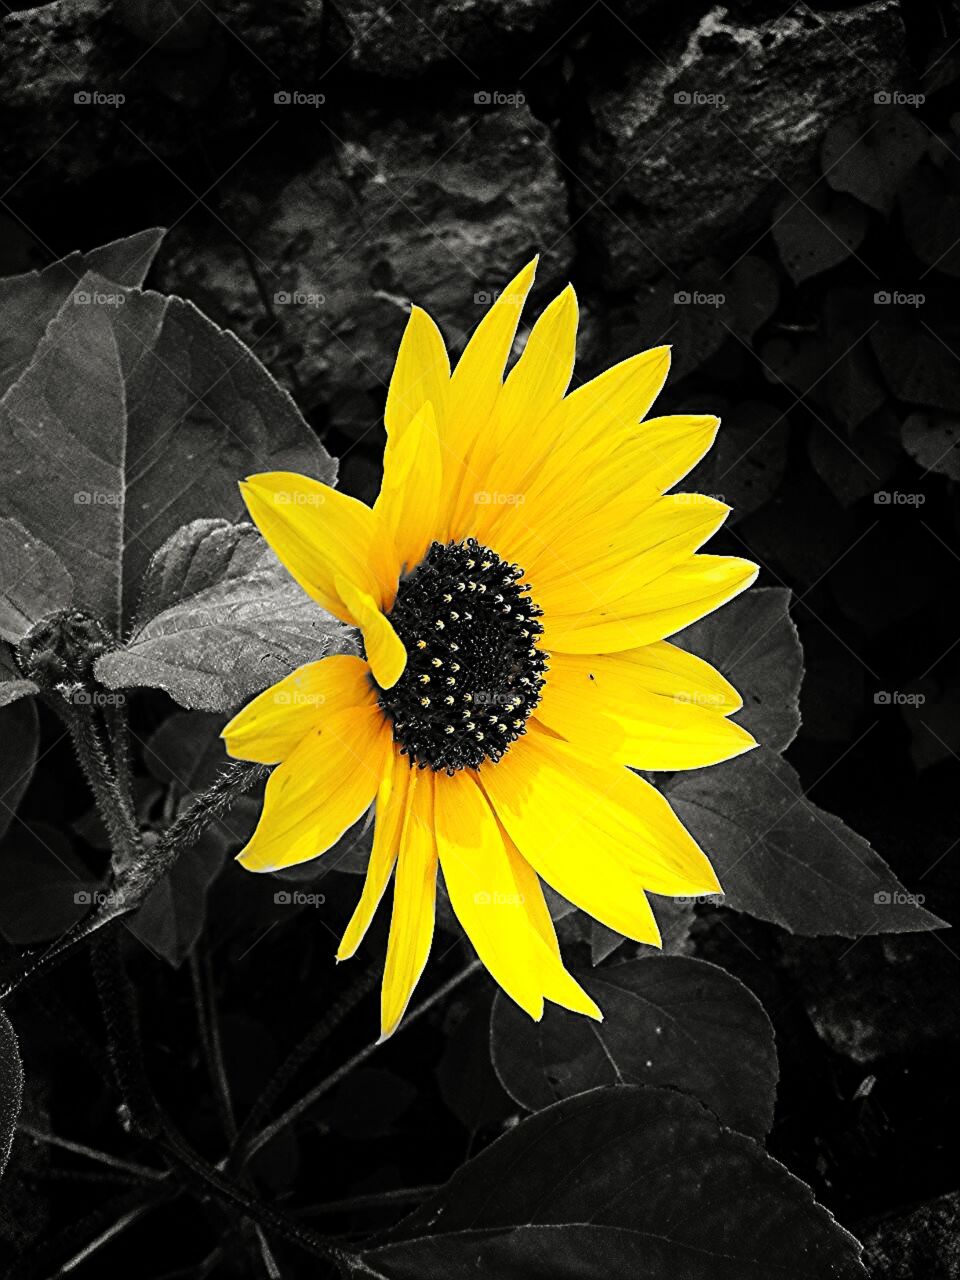 sunflower . pretty flower I snapped and edited with my phone 